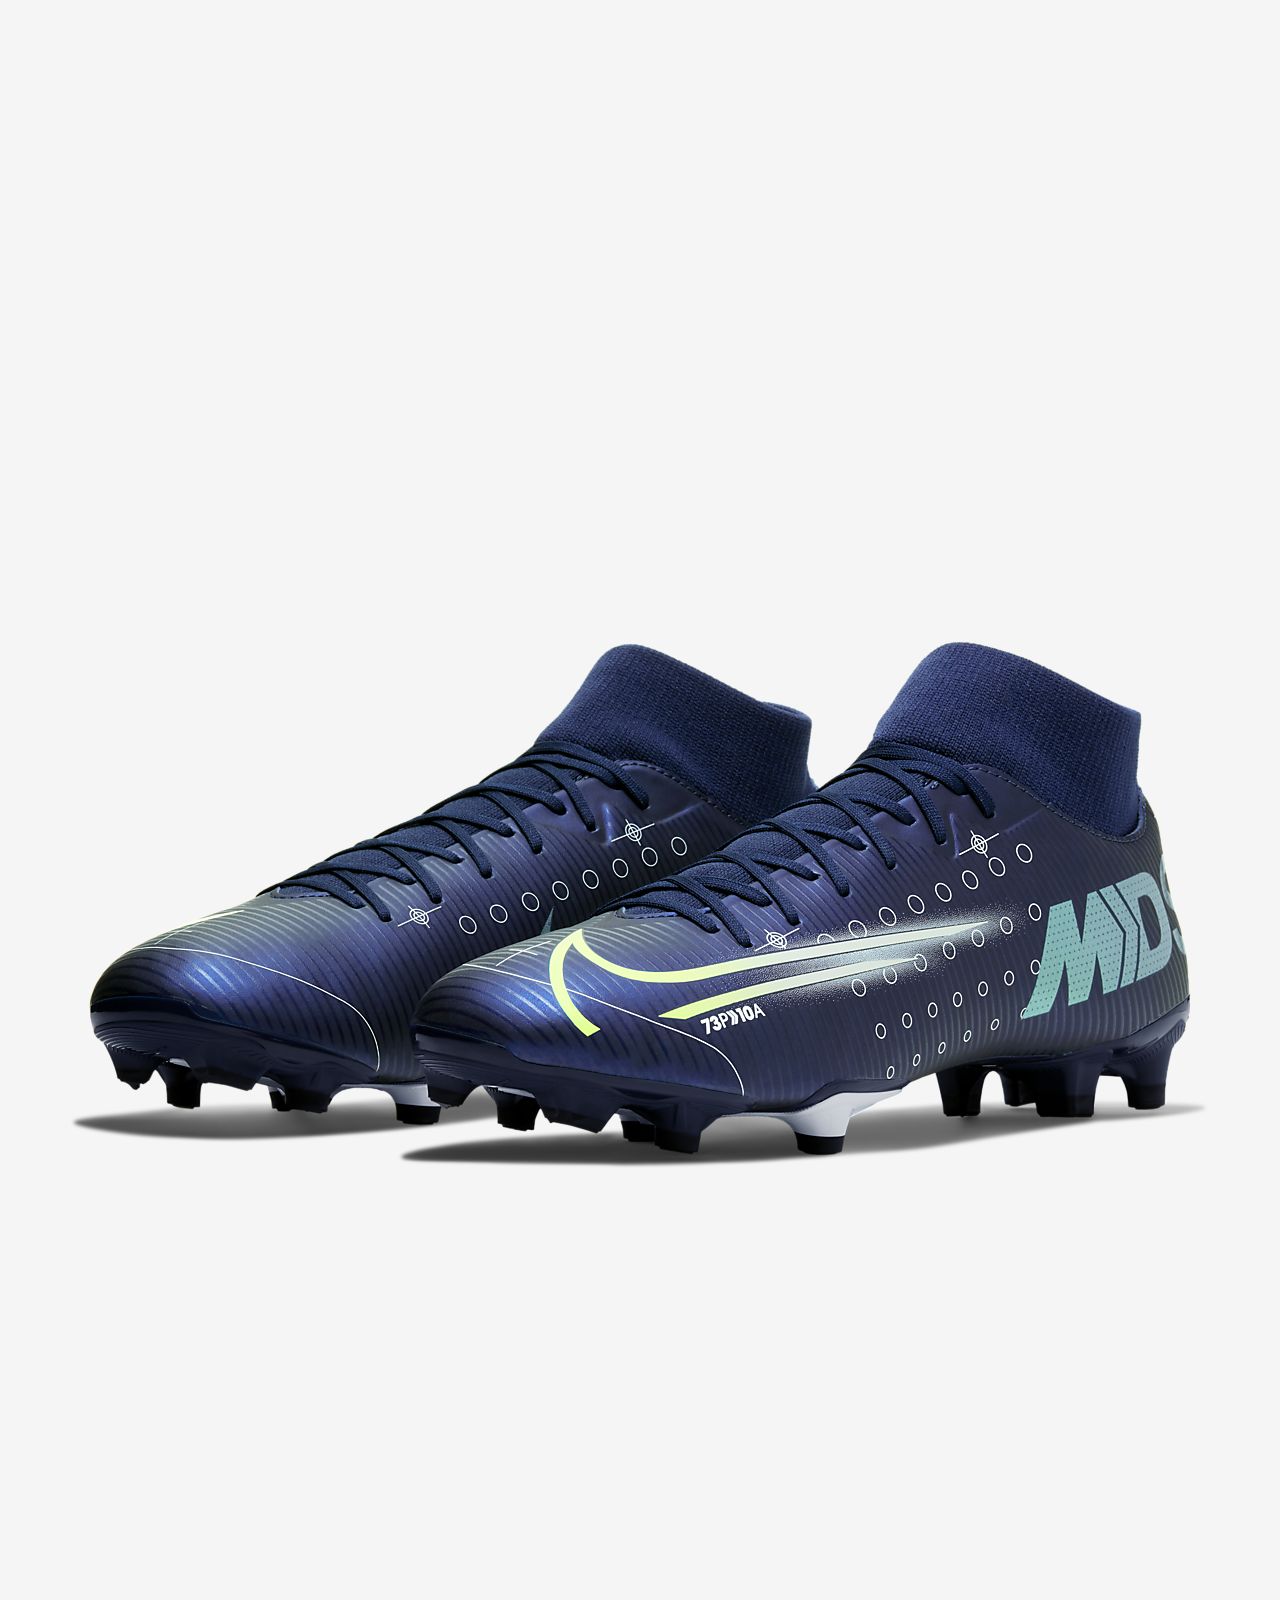 Nike Mercurial Superfly 6 Academy MG Game Over.